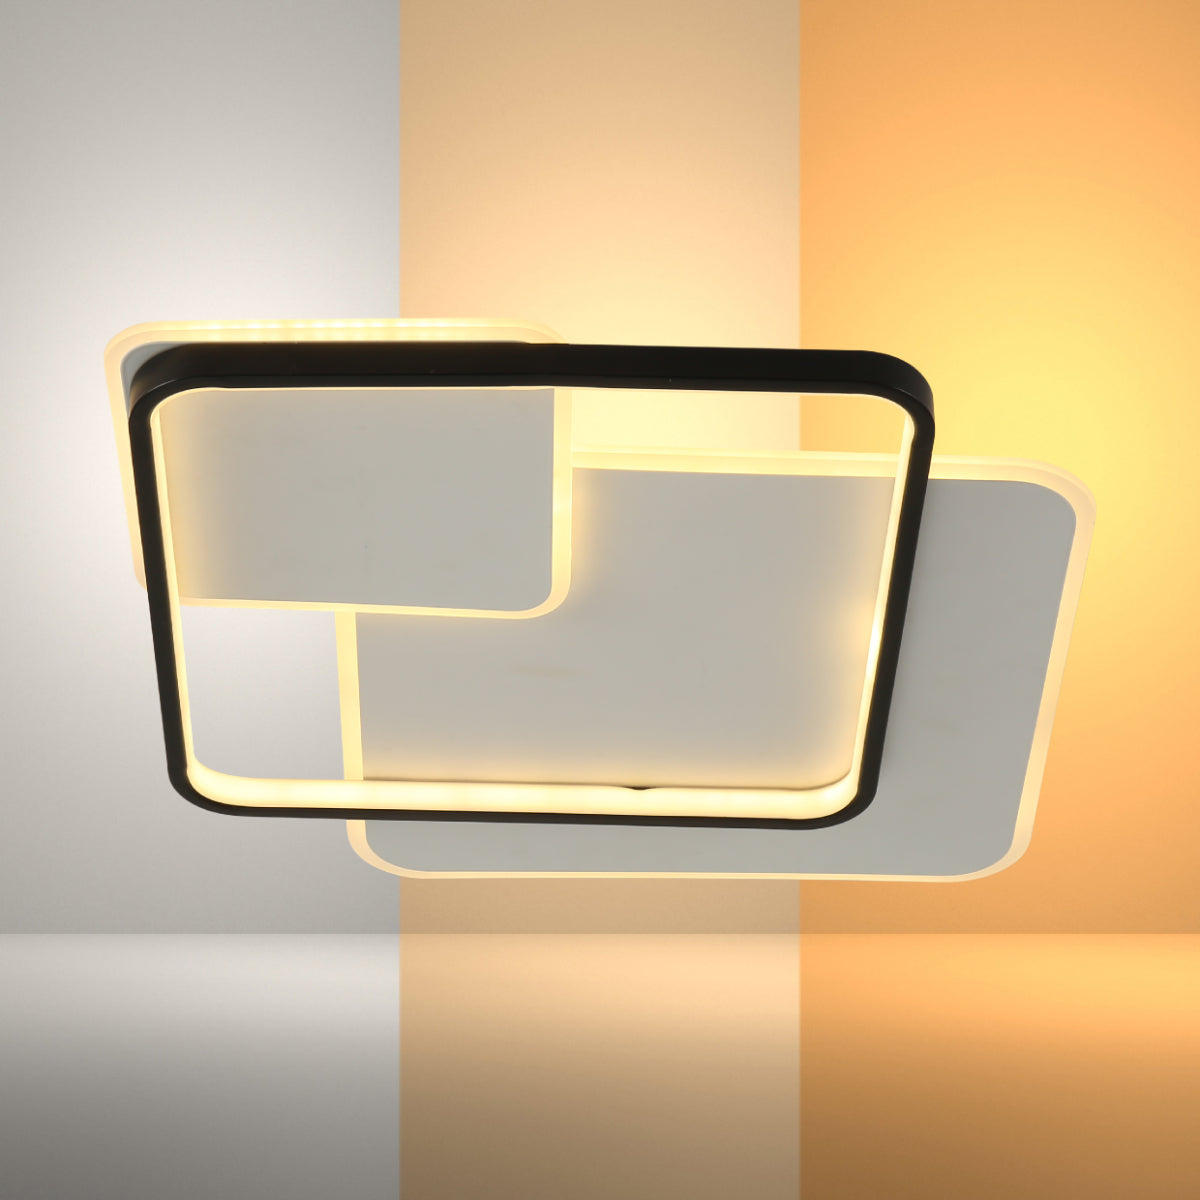 Main image of Intersecting Squares LED Flush Ceiling Light 159-18105